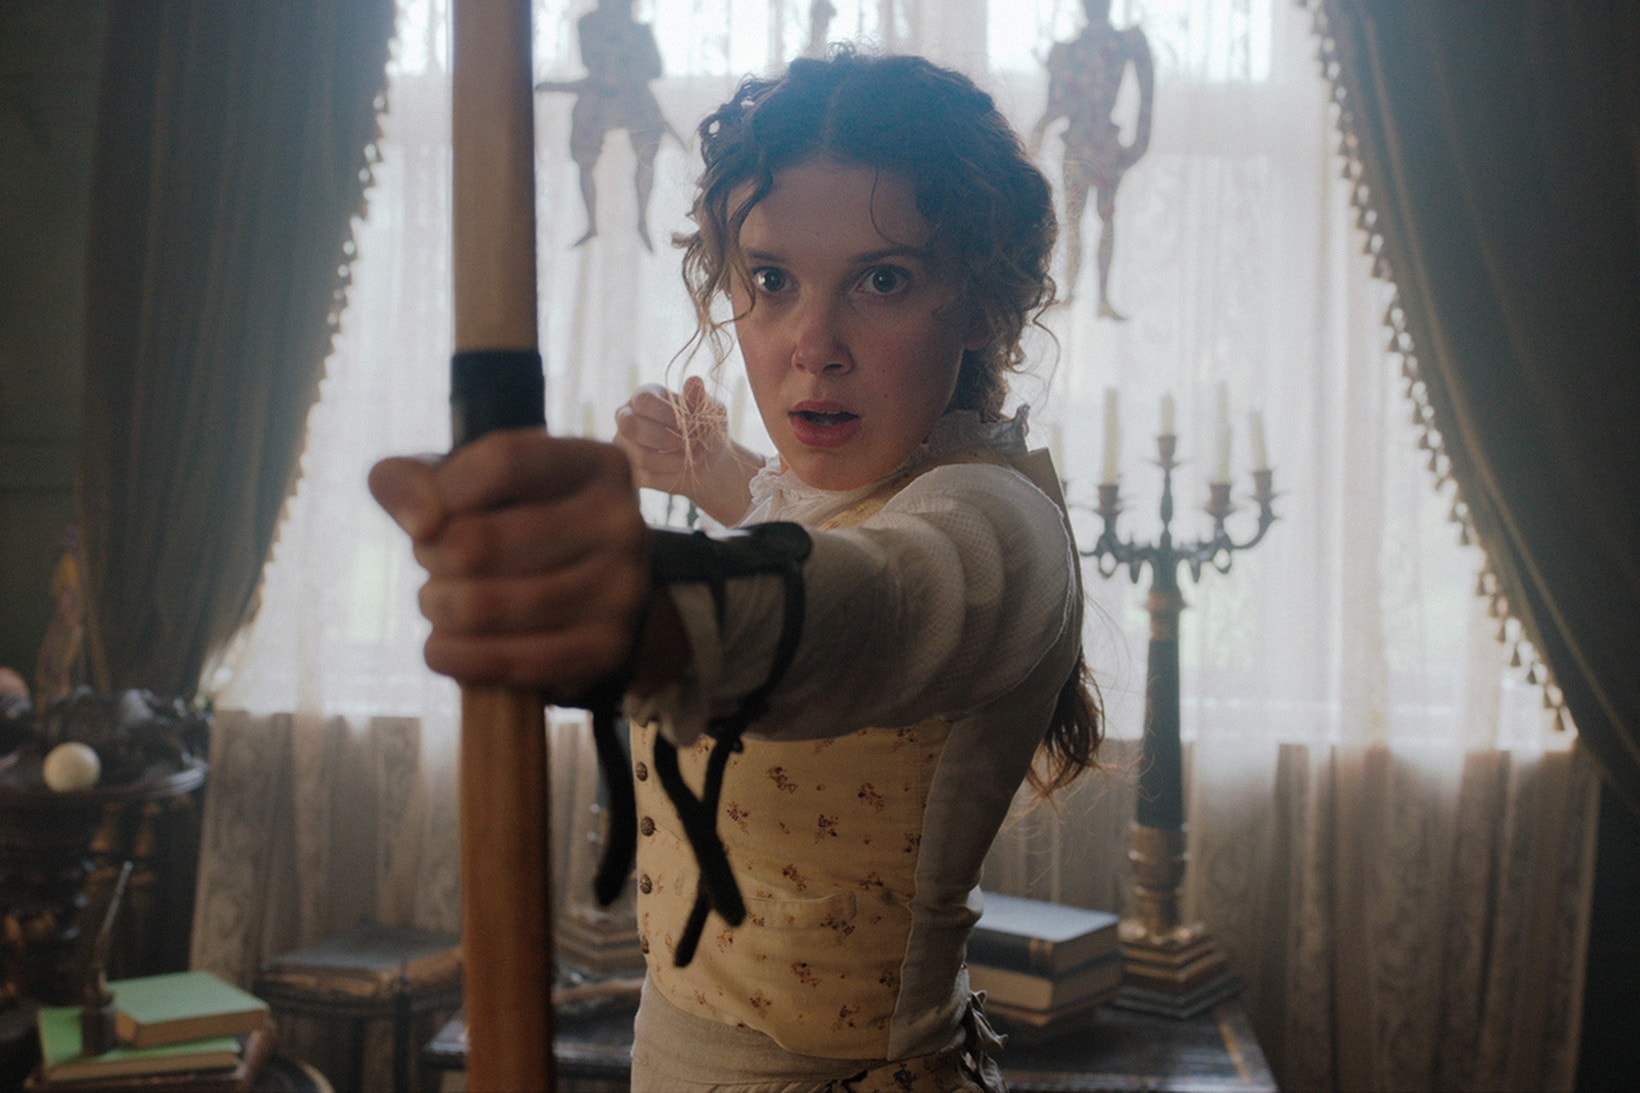 Millie Bobby Brown Enola Holmes Movie Character Still